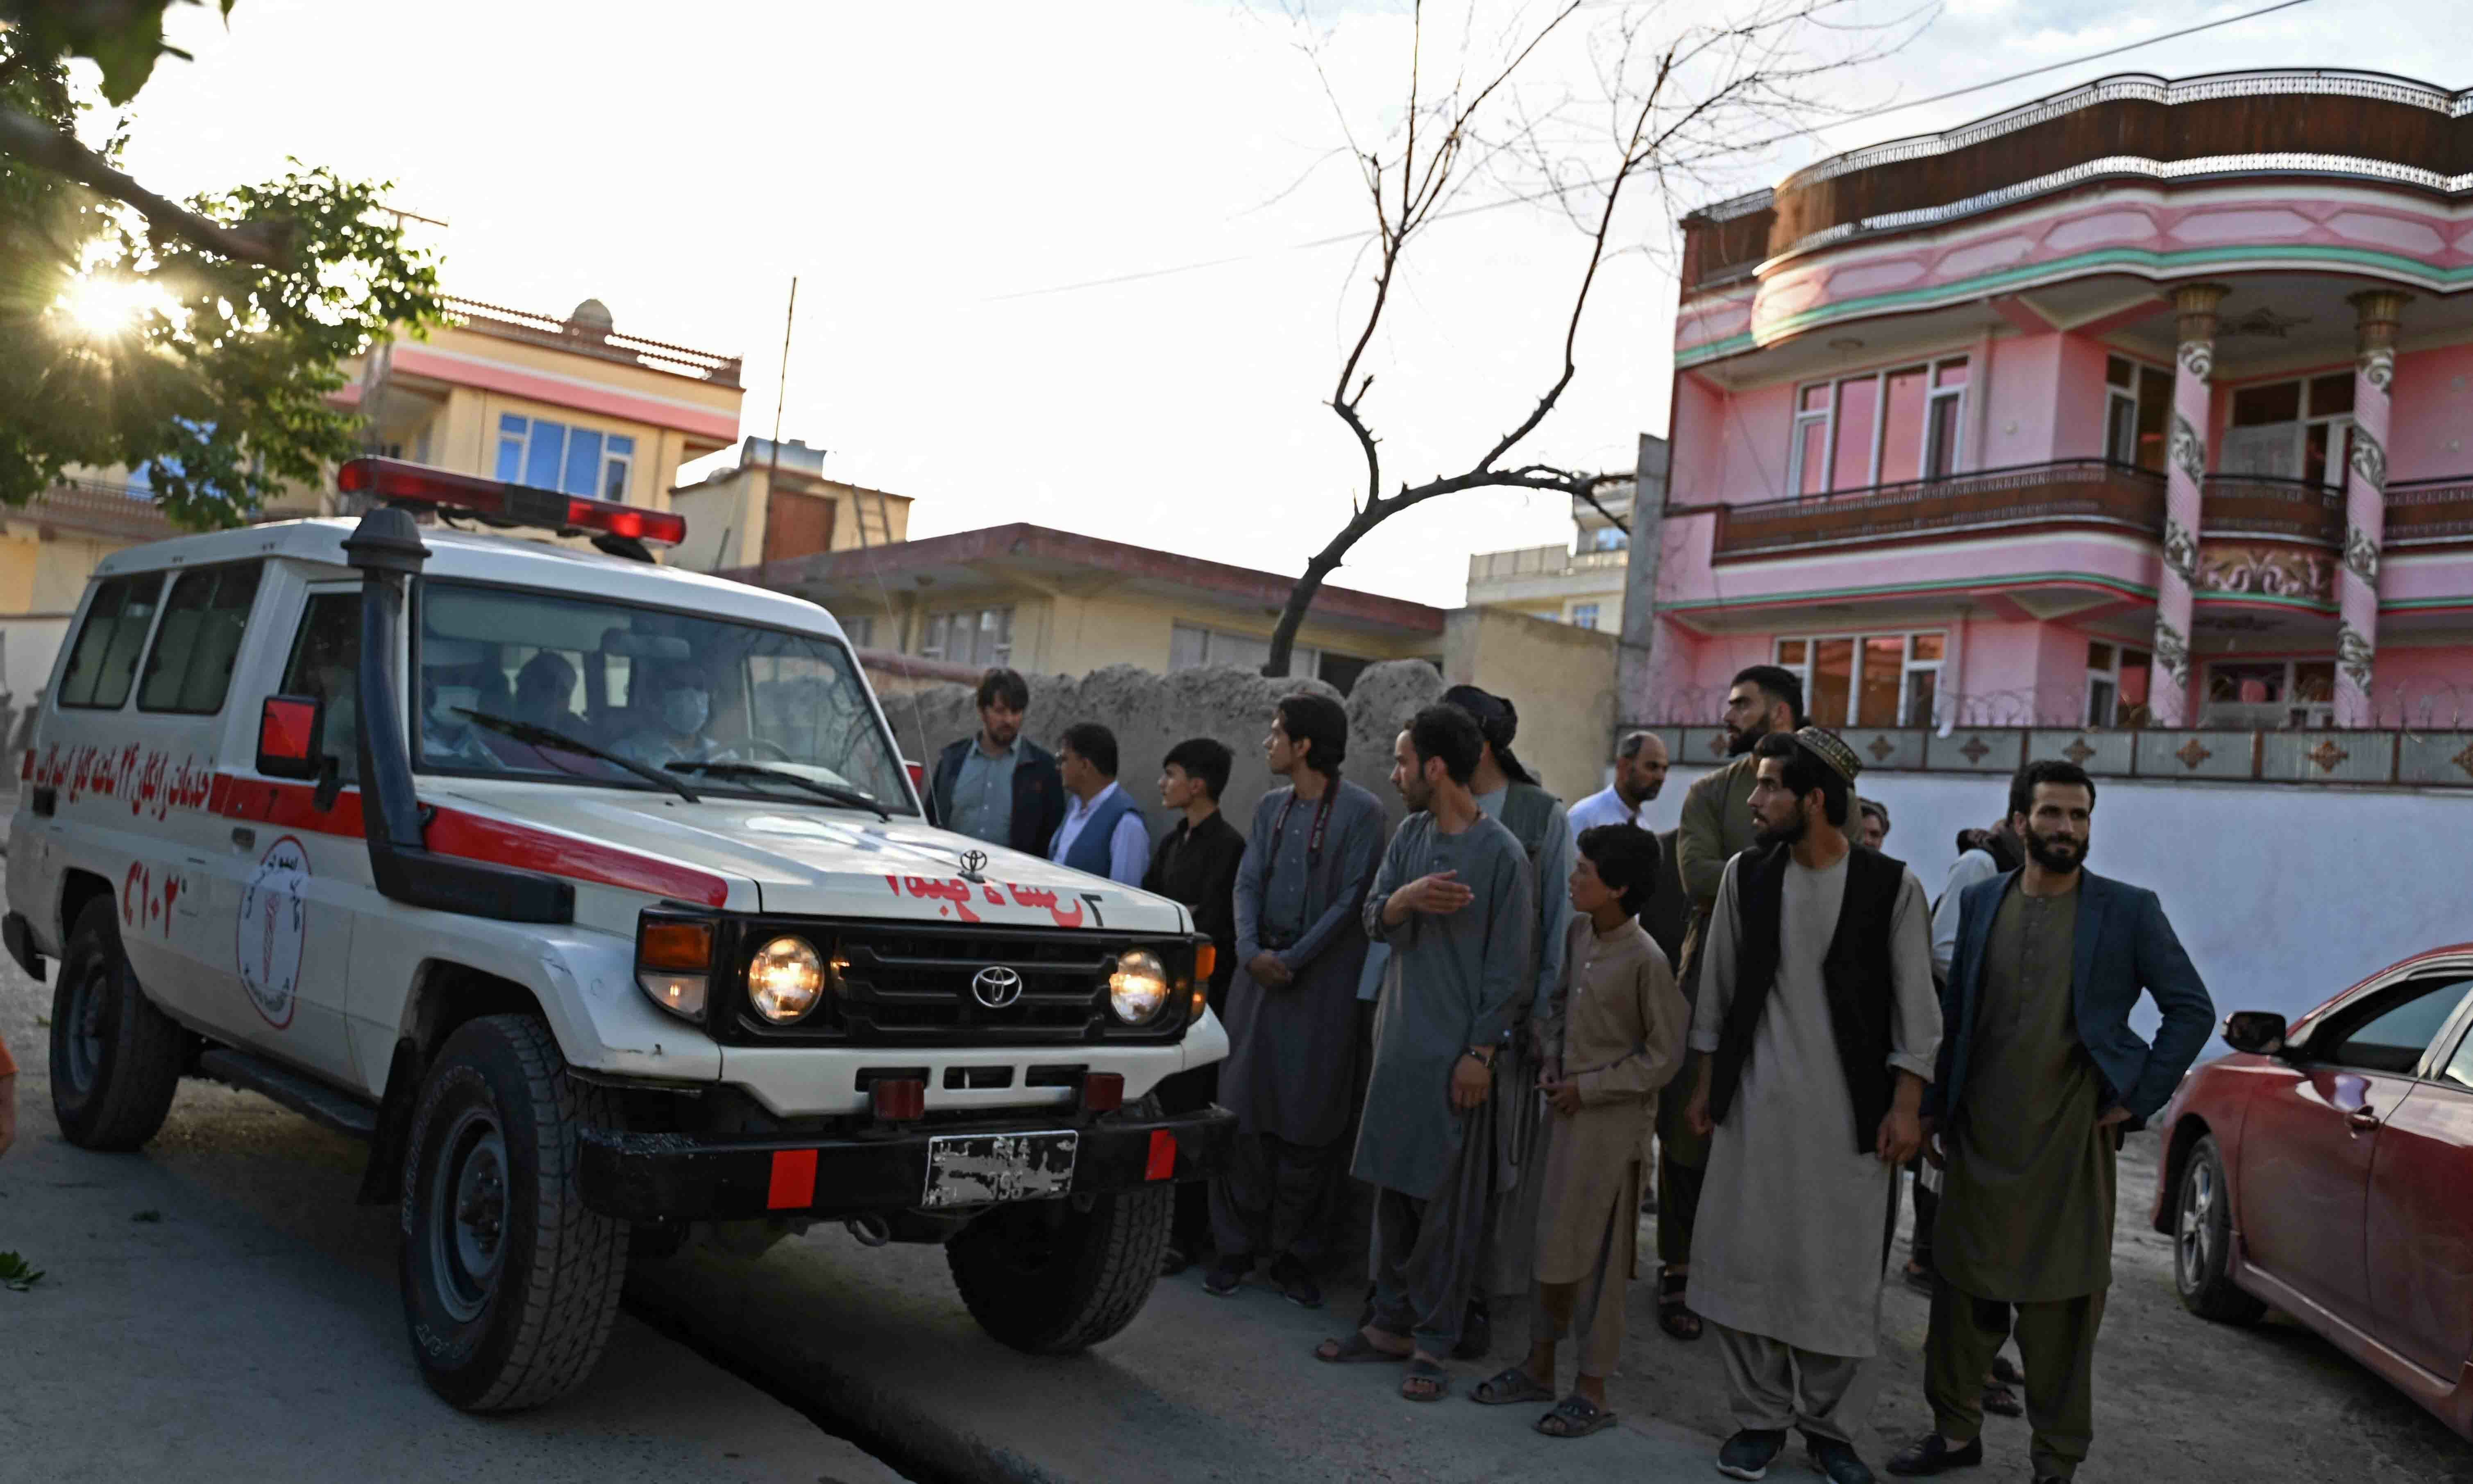 Onlookers stand next to an ambulance carrying victims near the site of a blast in Kabul on April 29. — AFP